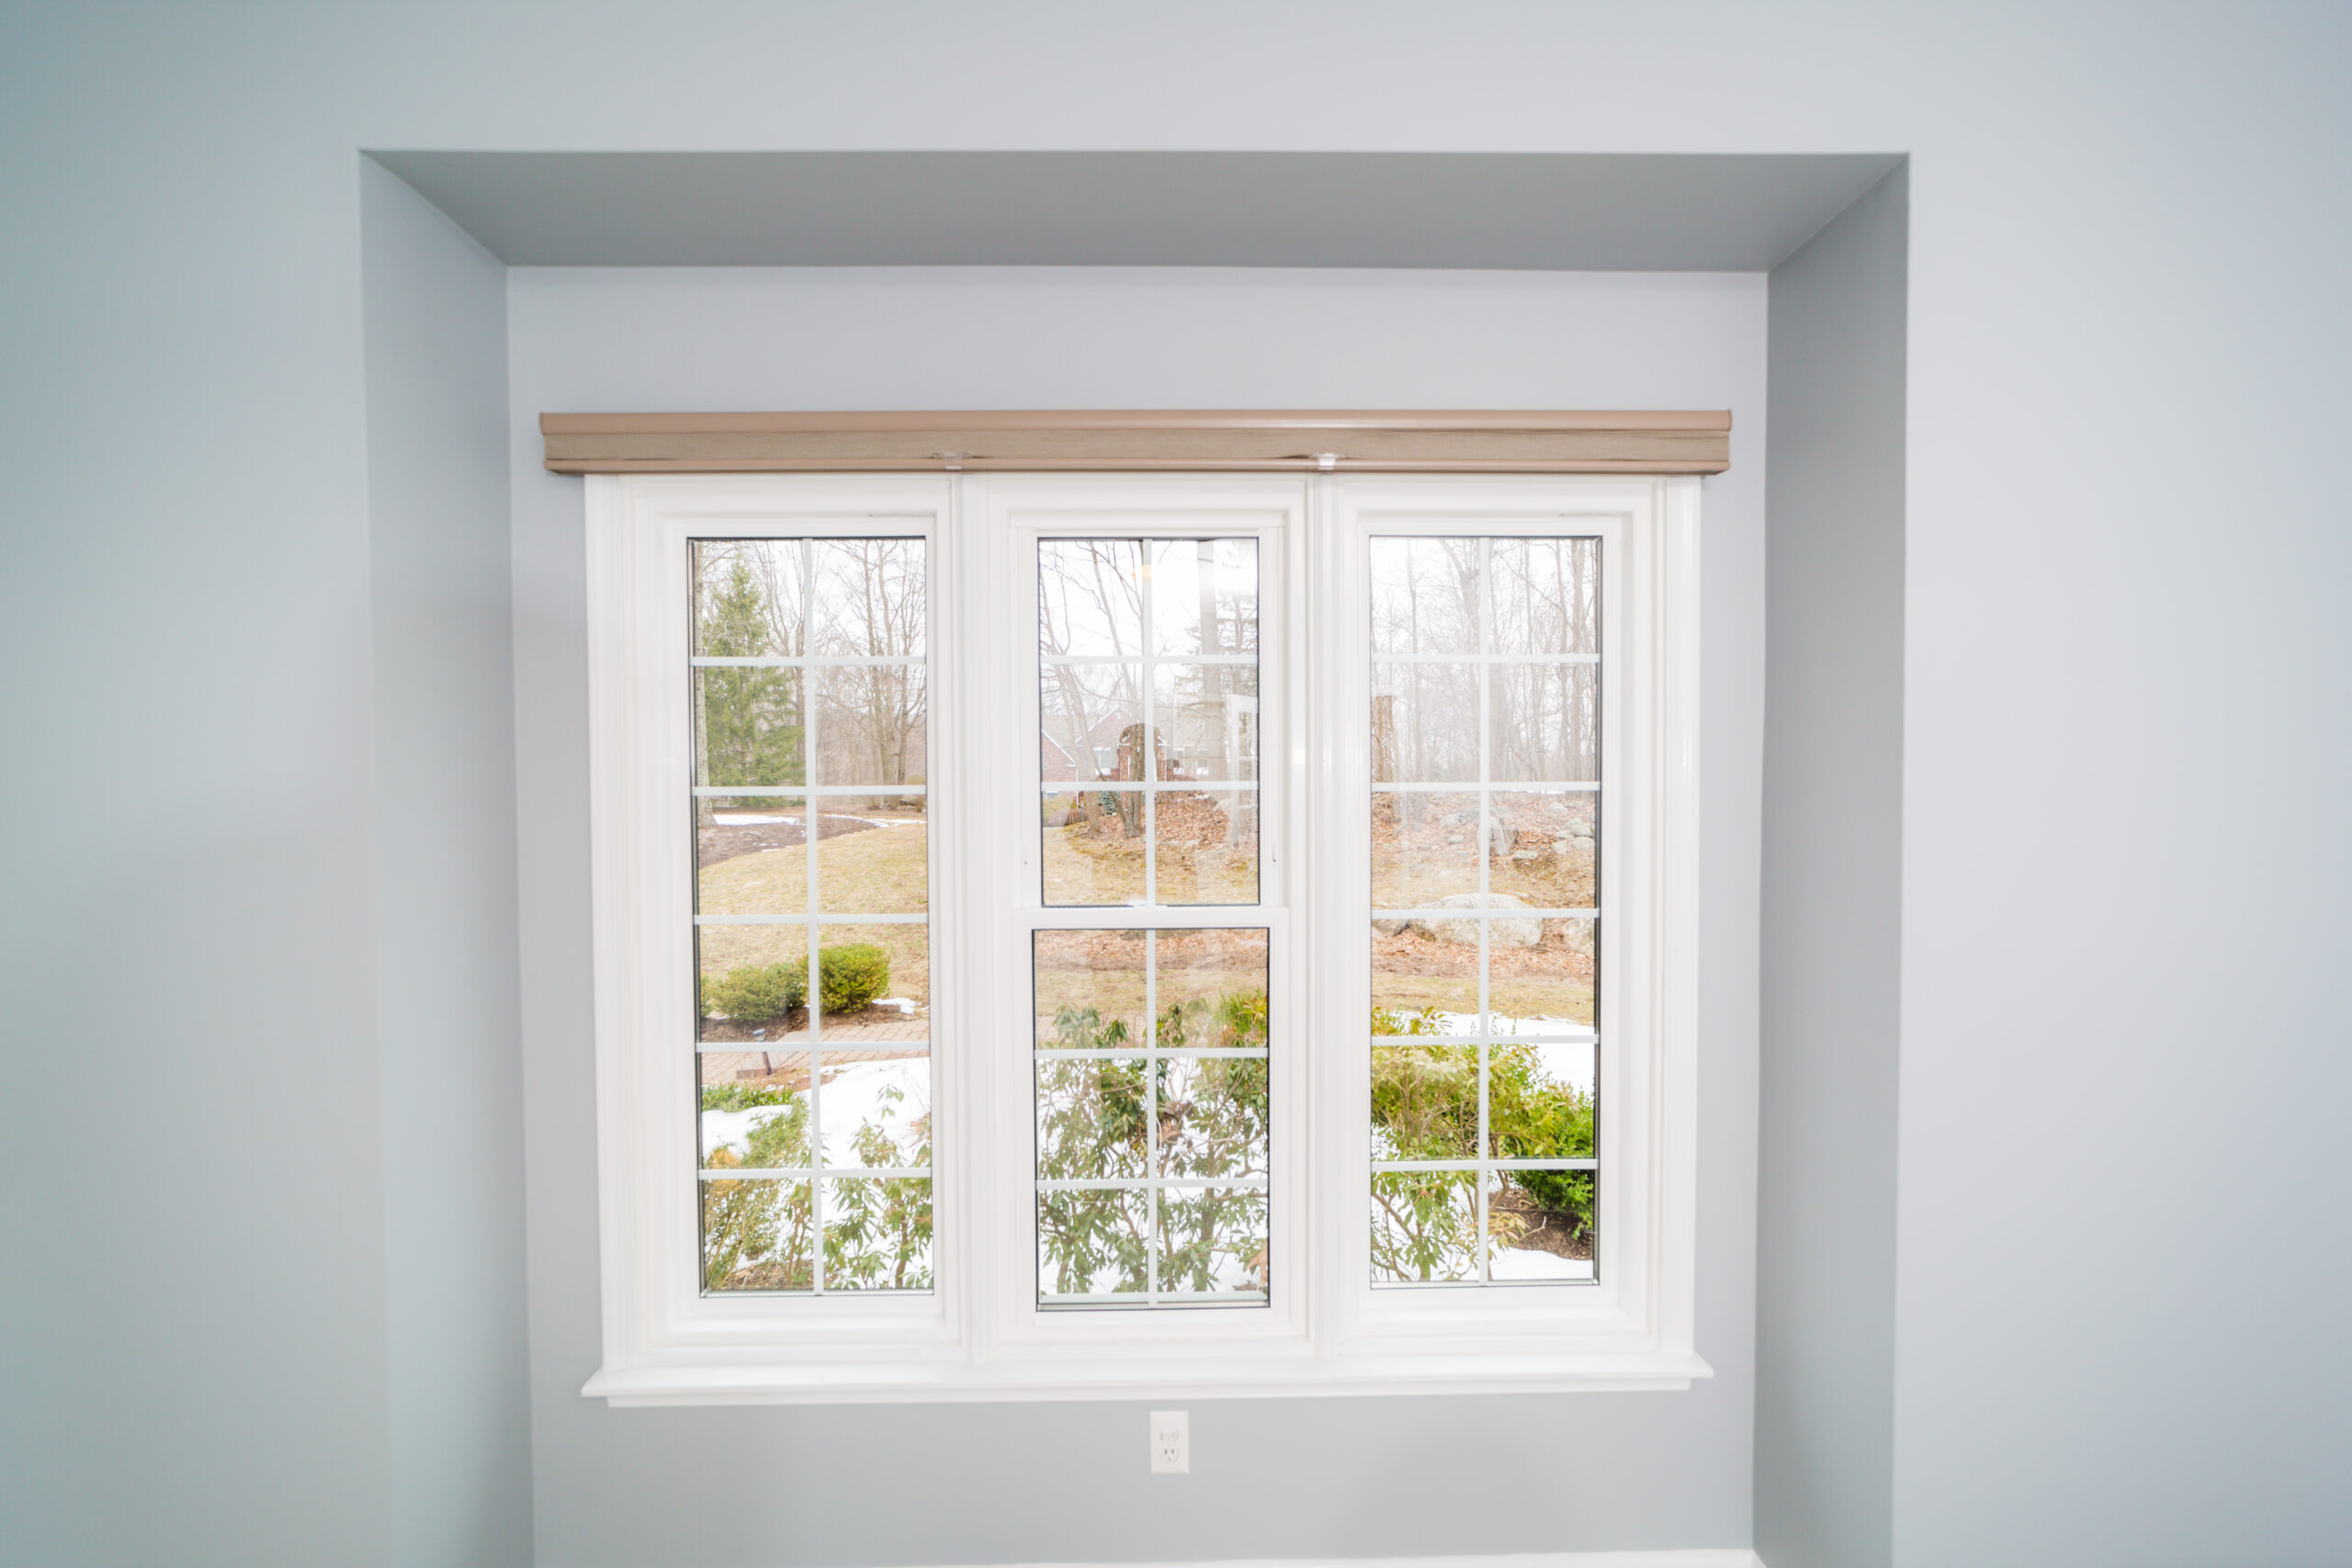 A window in a room with white trim.